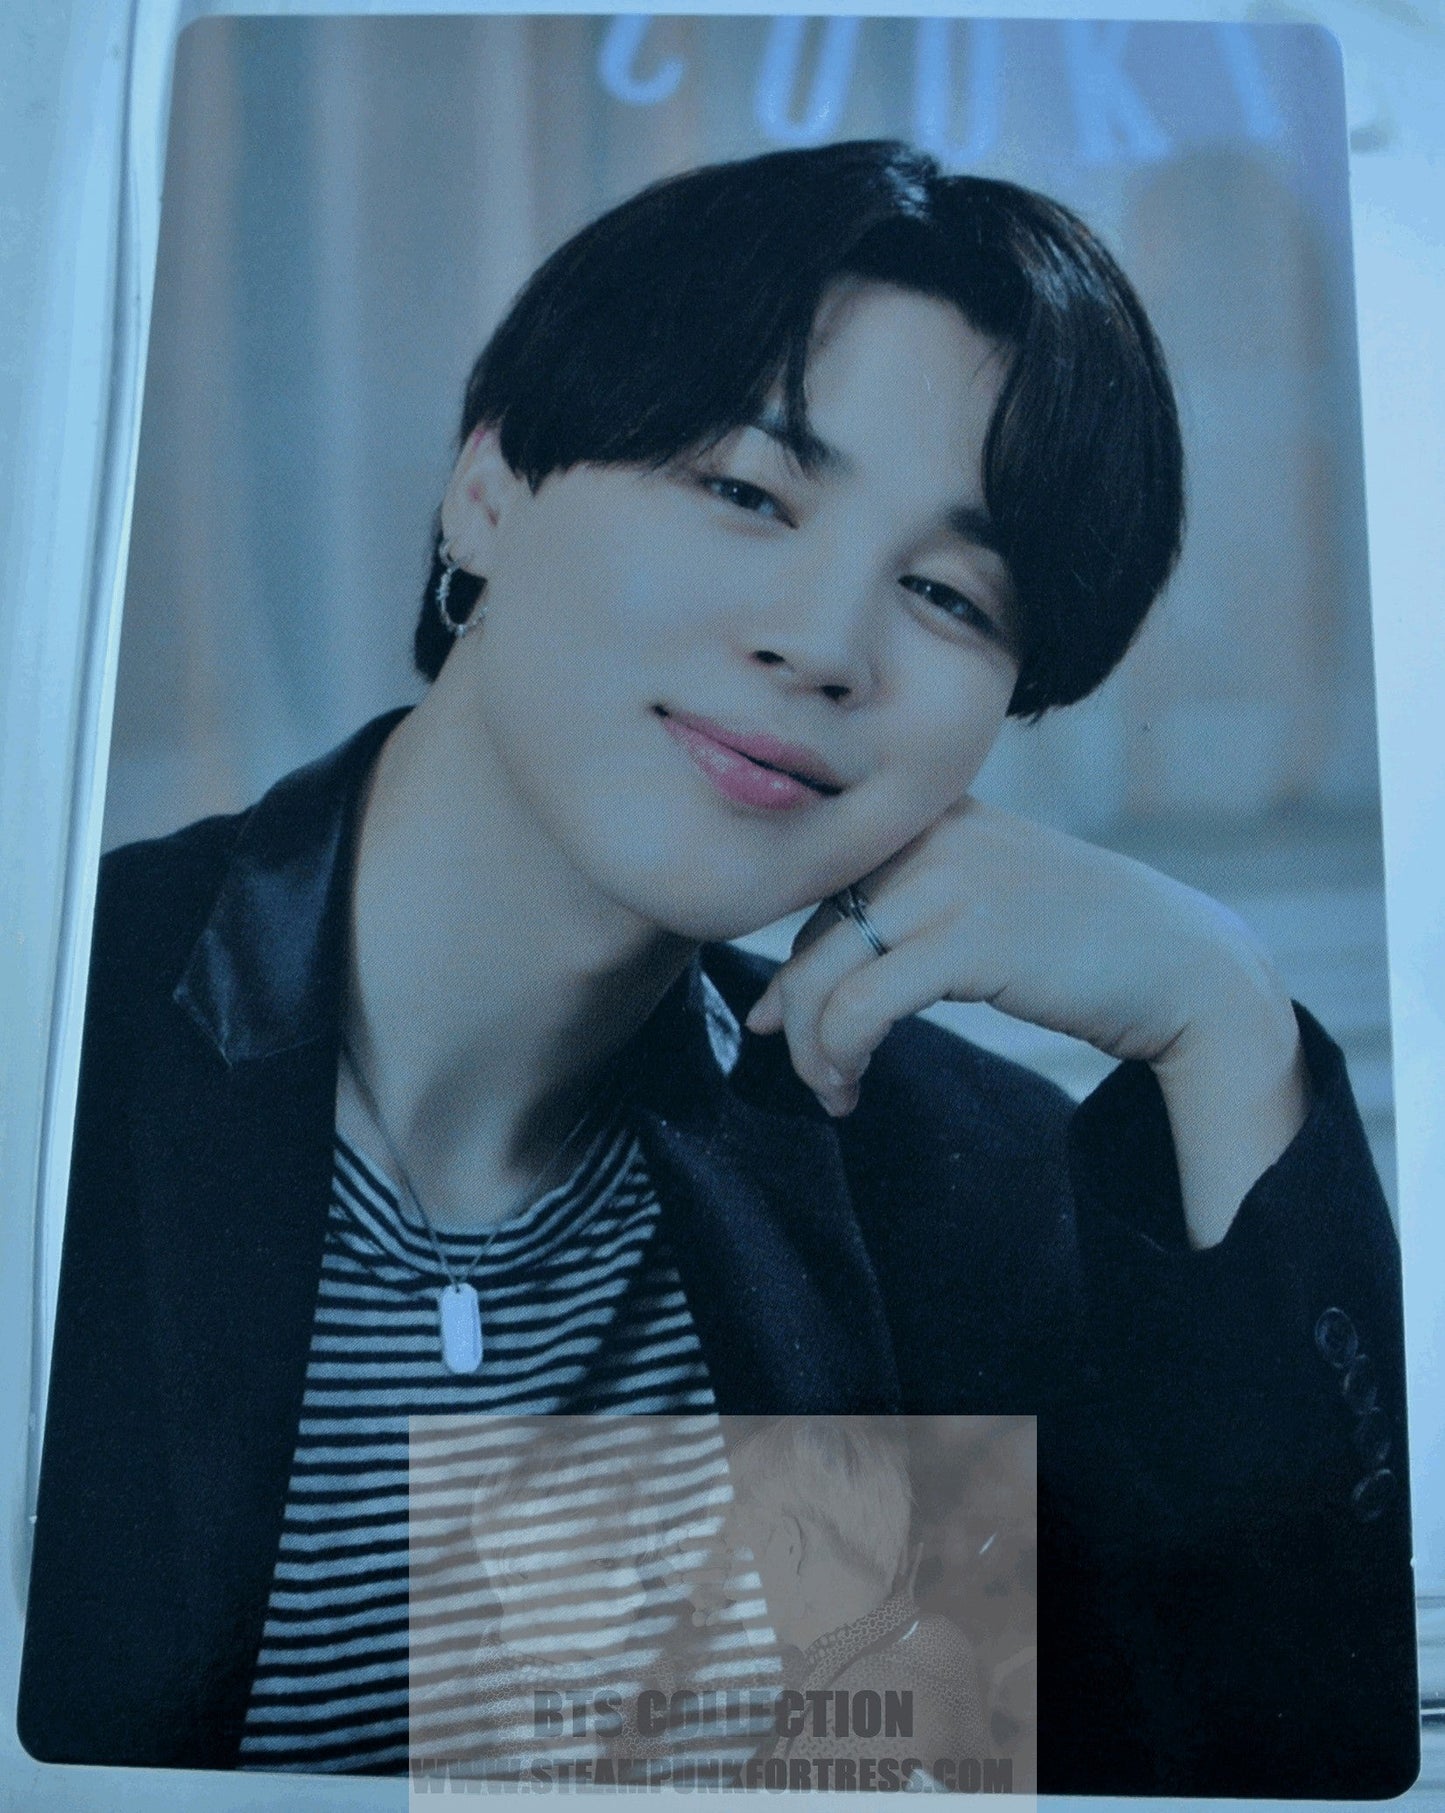 BTS JIMIN PARK JI-MIN 2022 PERMISSION TO DANCE ON STAGE SEOUL PTD #1 OF 4 PHOTOCARD PHOTO CARD NEW OFFICIAL MERCHANDISE